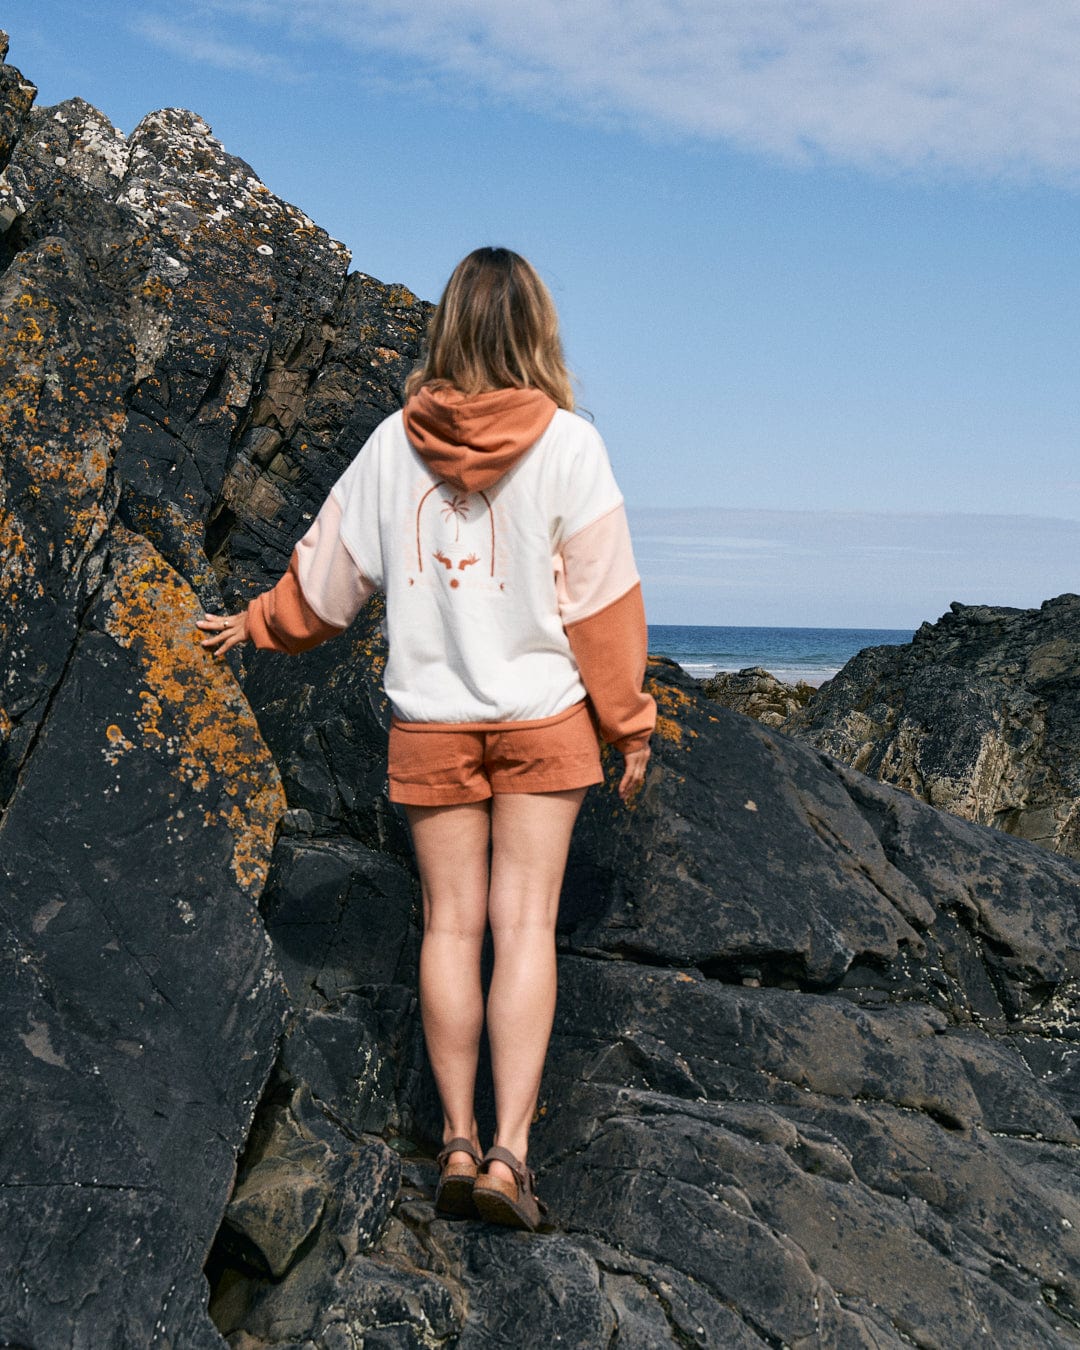 A person in a Palmera - Womens Pop Hoodie - Cream with Saltrock branding stands on rocky terrain, facing away towards the ocean, their loose fit shorts fluttering in the breeze.